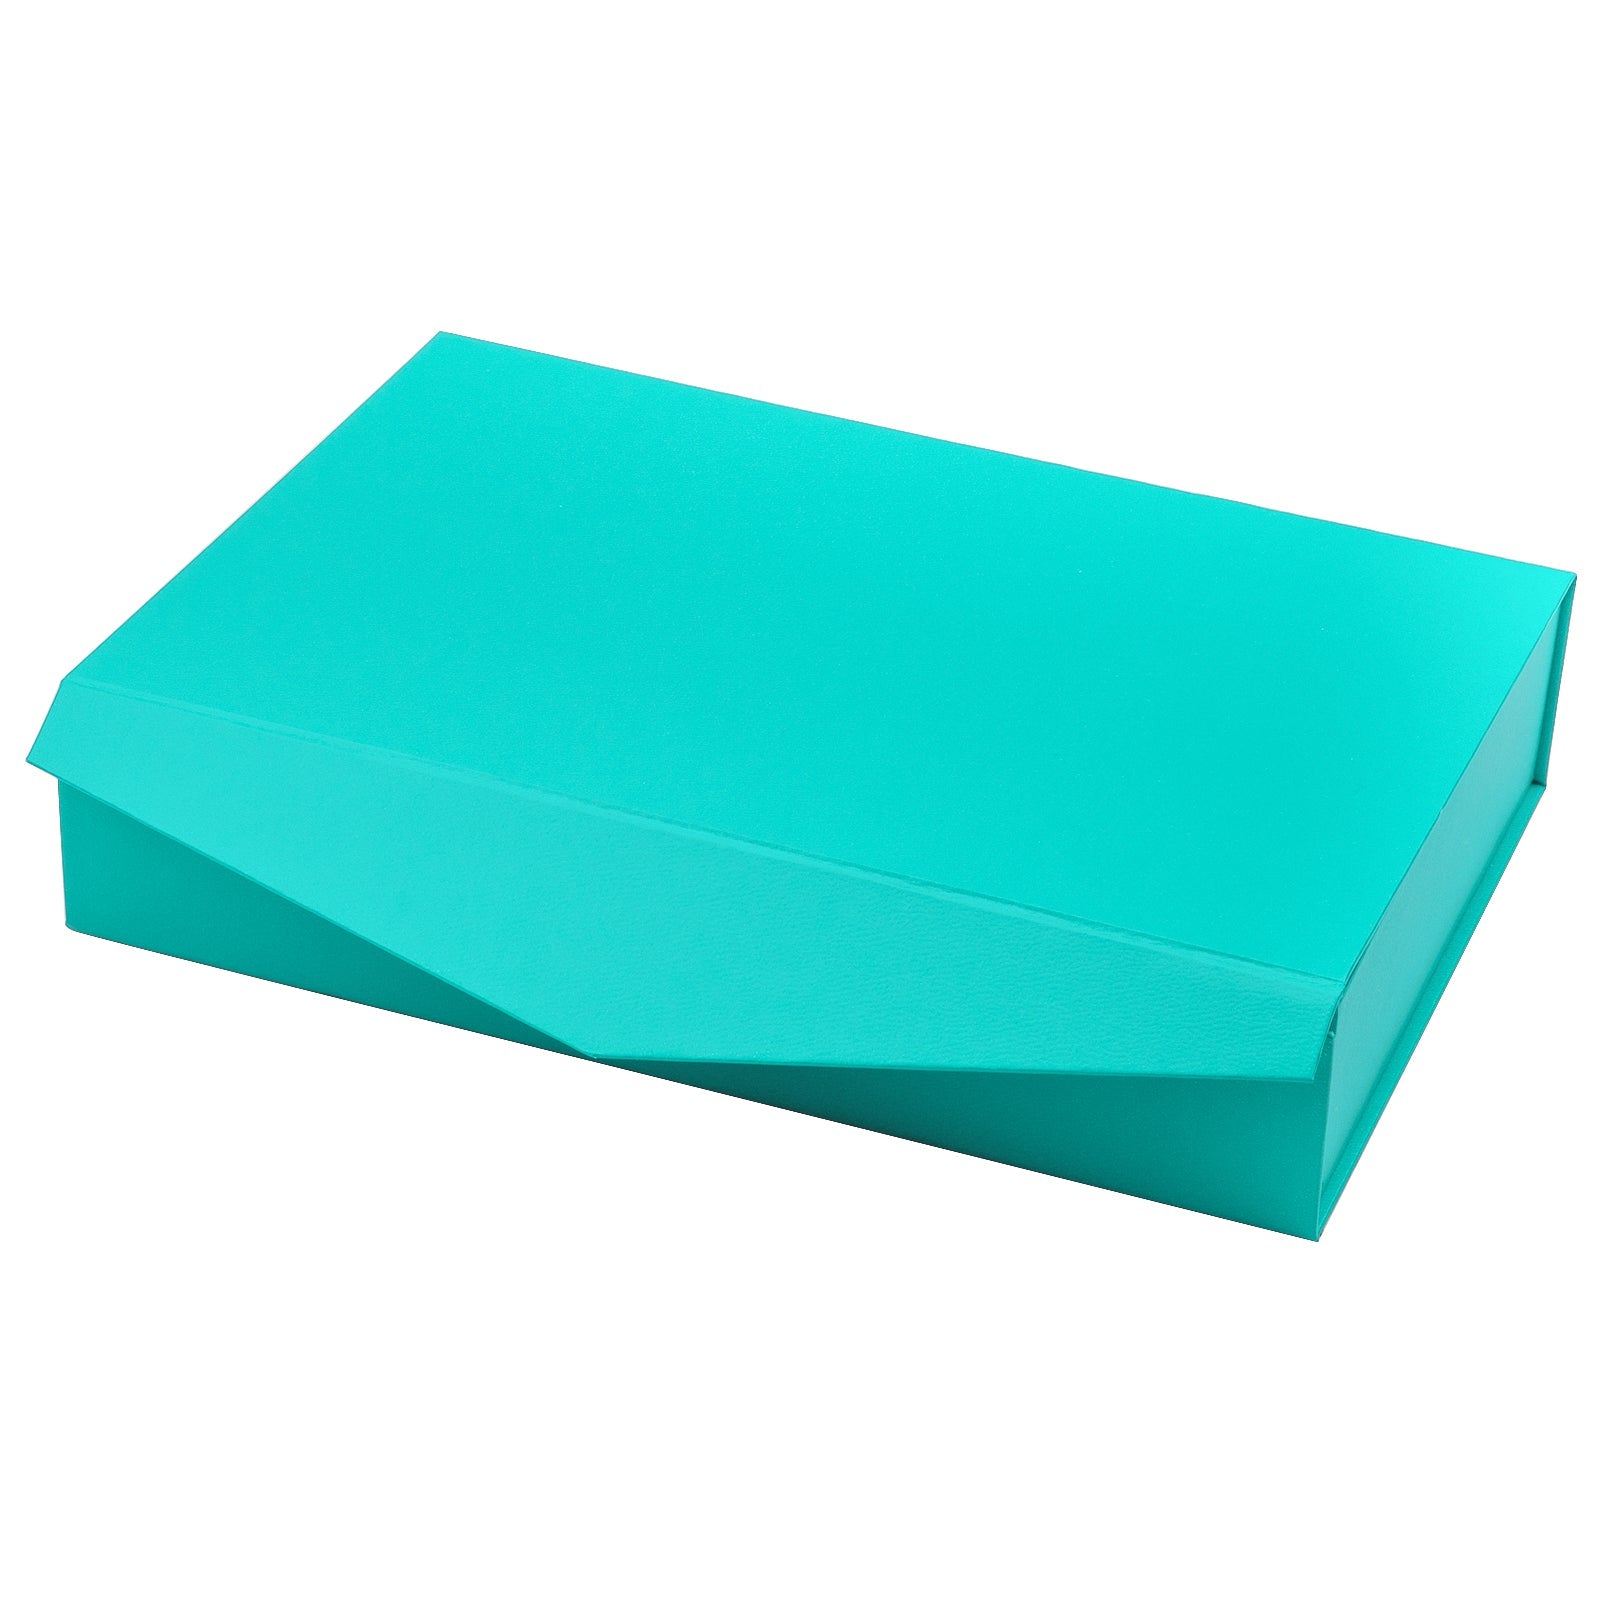 10x7x2.4 inch Collapsible Gift Box with Magnetic Closure